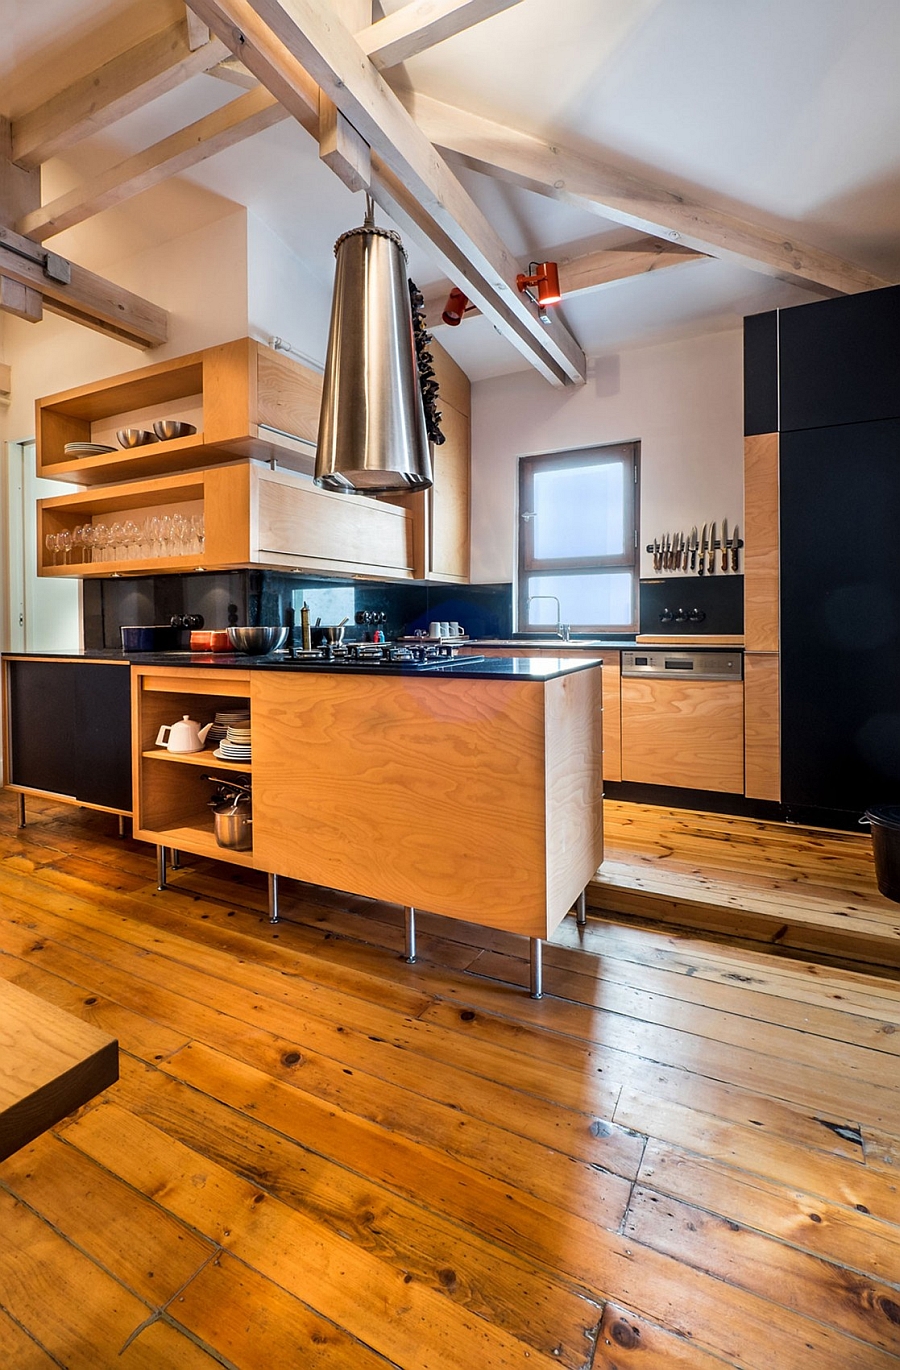 Kitchen design that embraces wooden warmth along with black